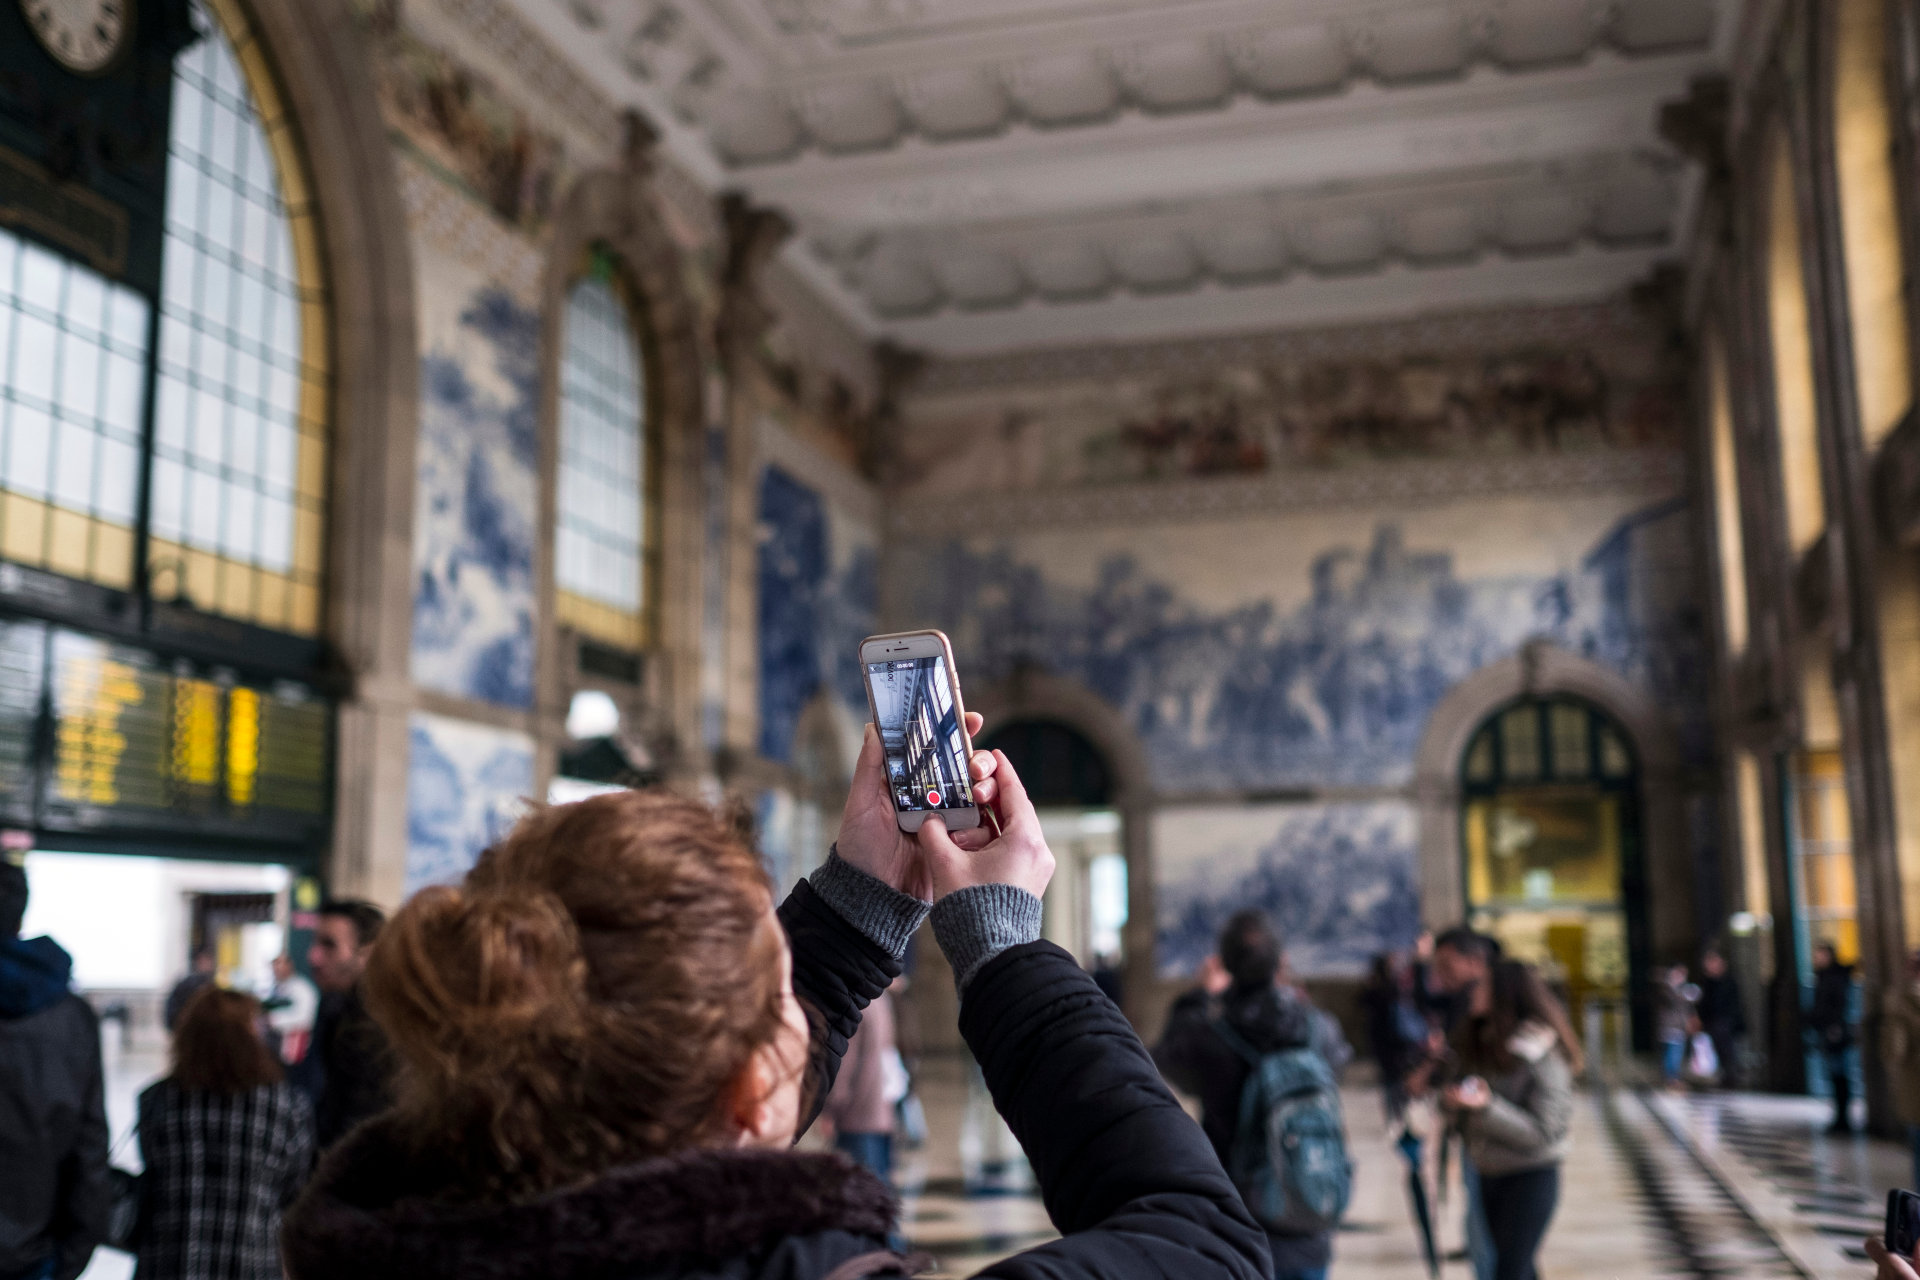 A person taking a photo of the São Bento Station